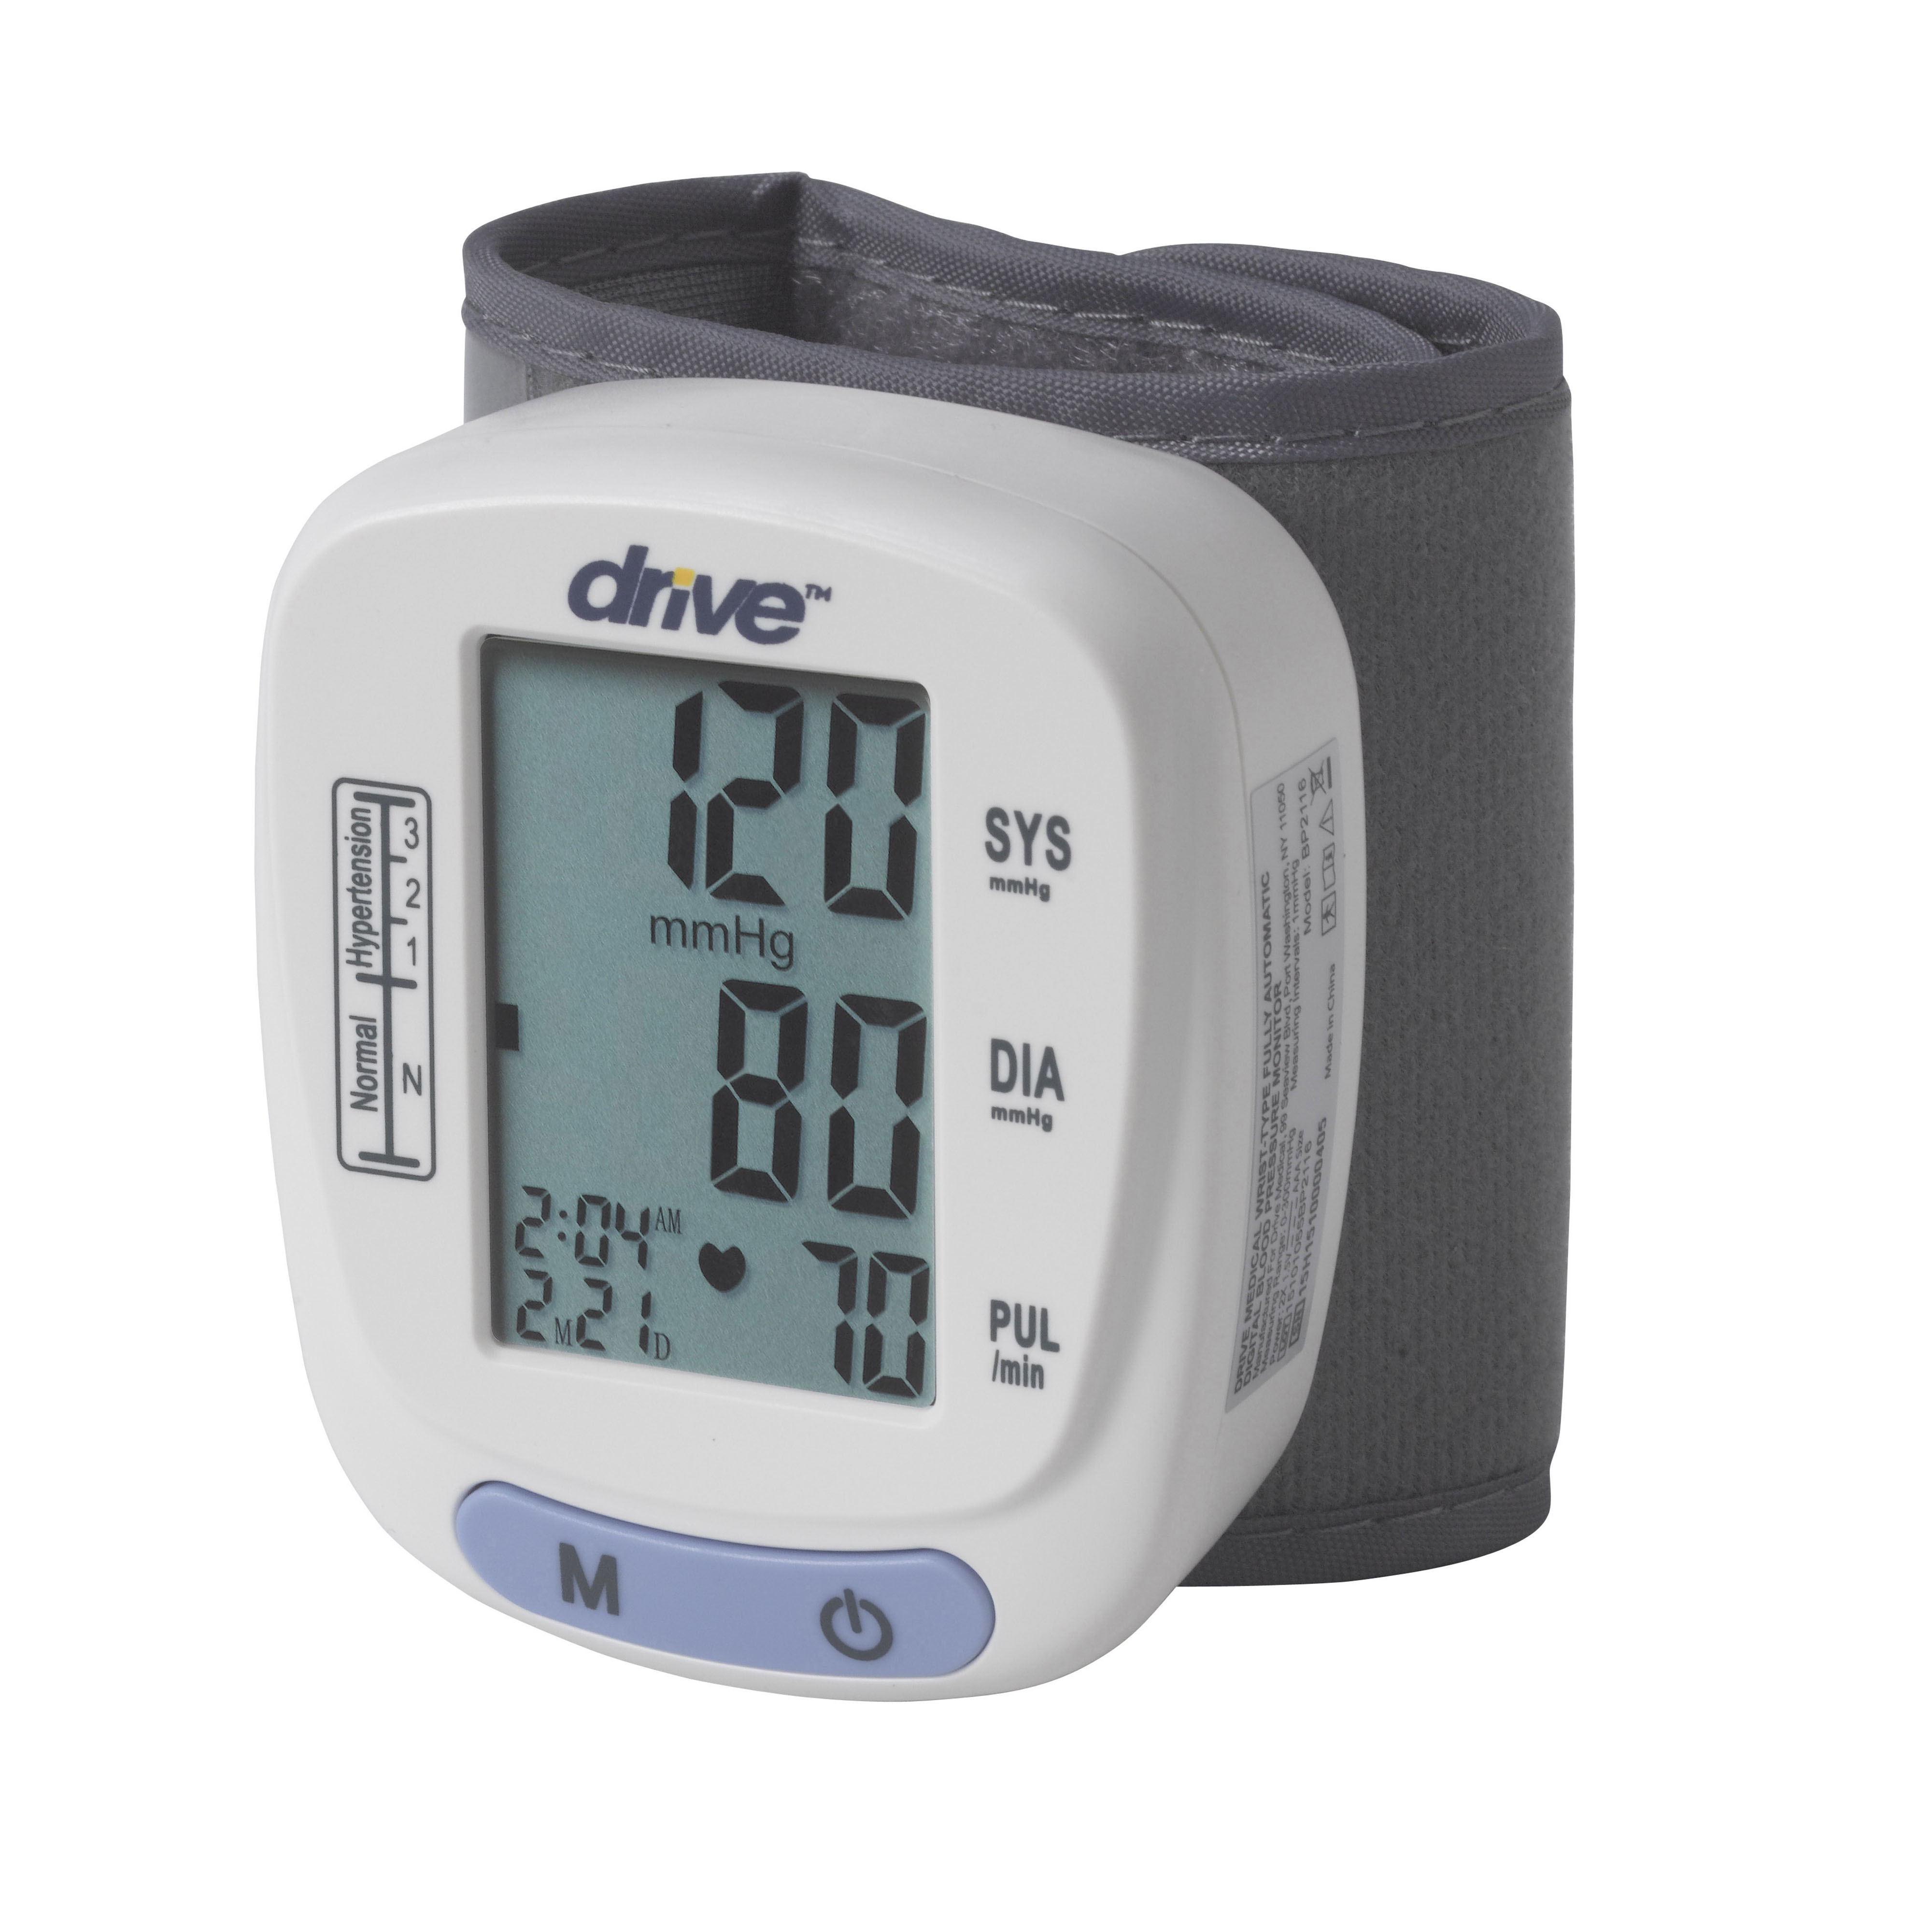 Drive Medical Automatic Blood Pressure Monitor, Wrist Model - image 1 of 7